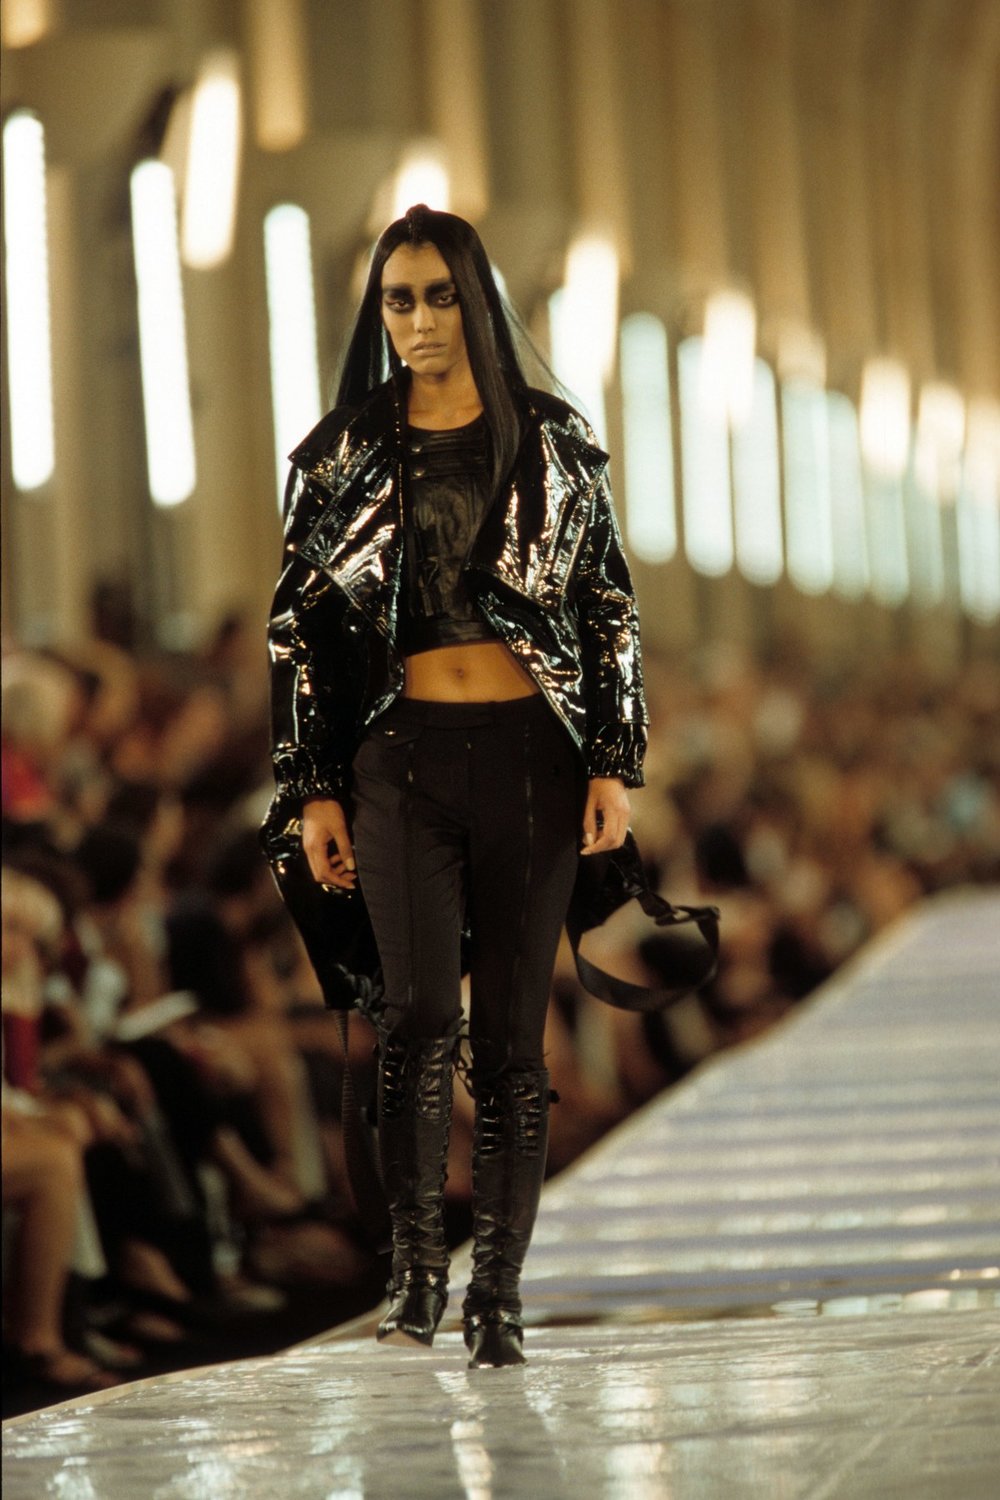 The Y2K Fashion Aesthetic Is Back - Early 2000s Trends and How to